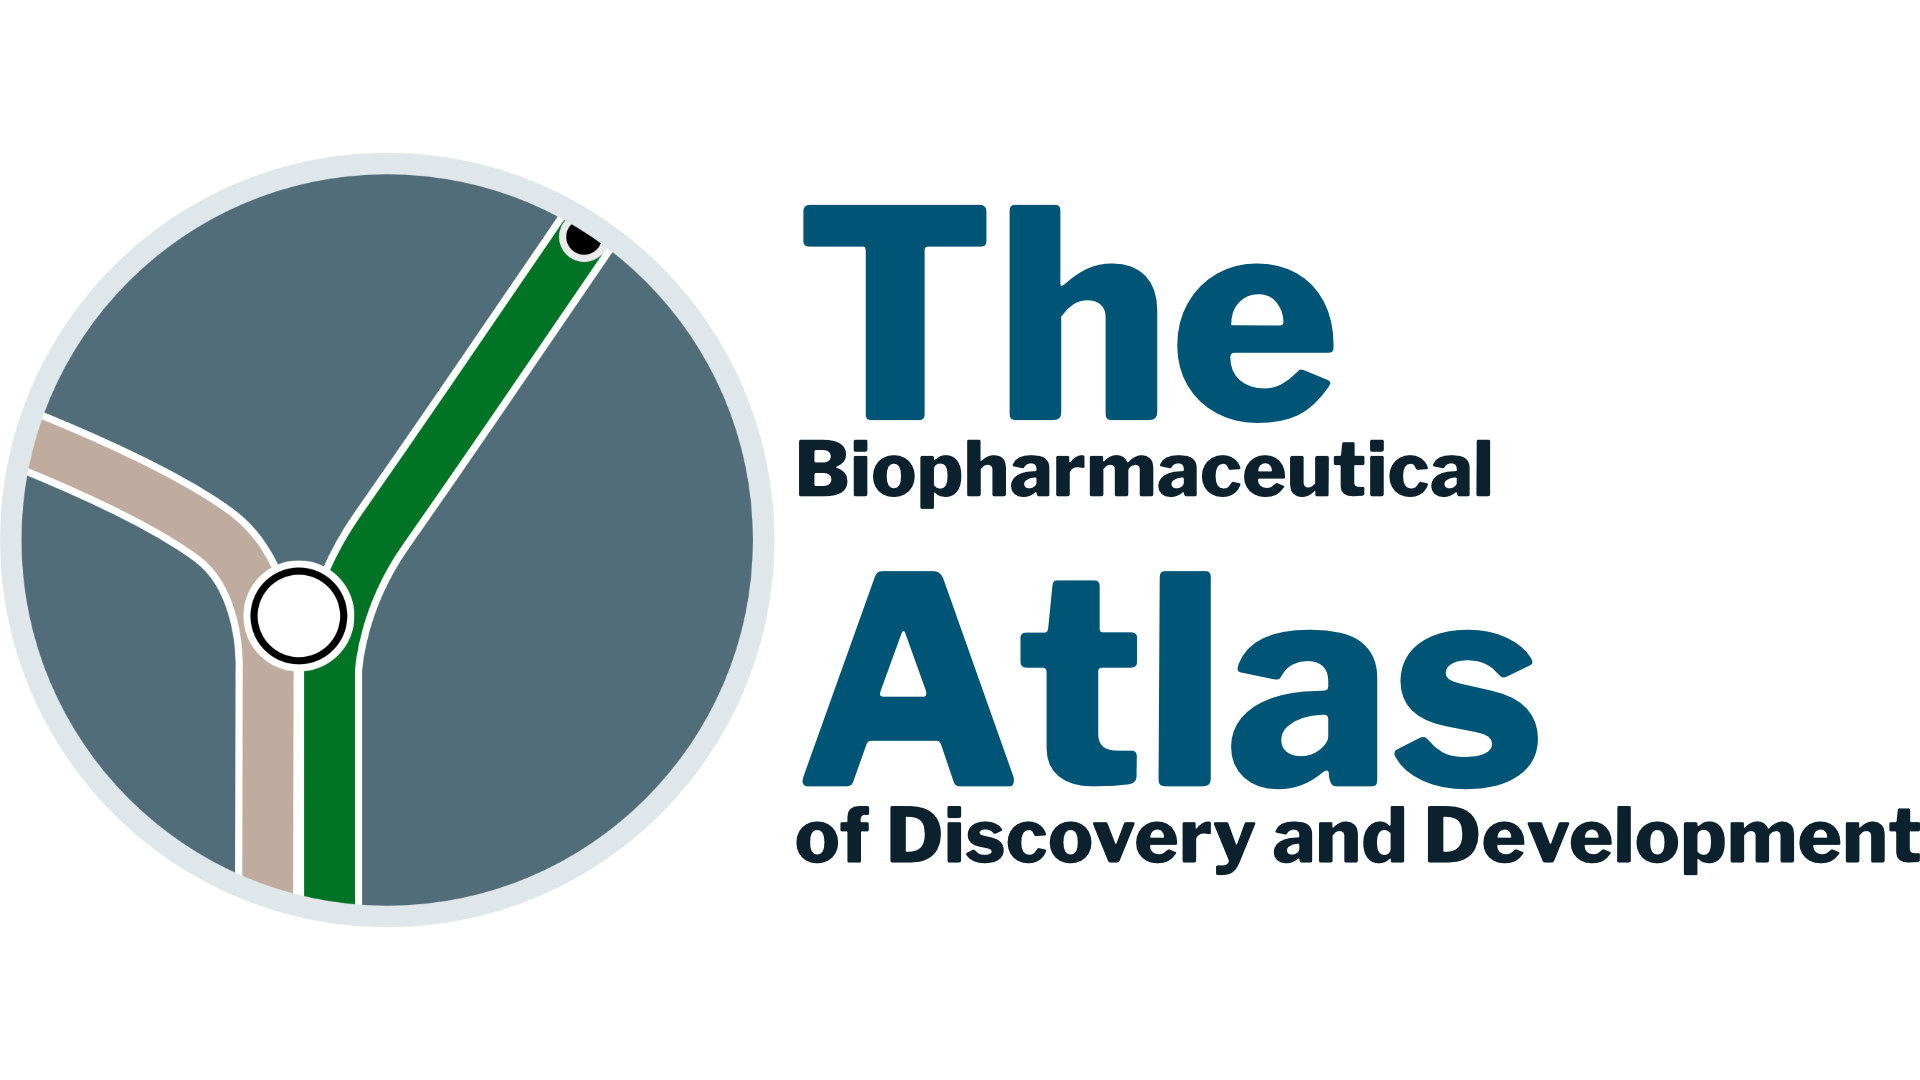 The Biopharmaceutical Atlas of Discovery and Development name and logo